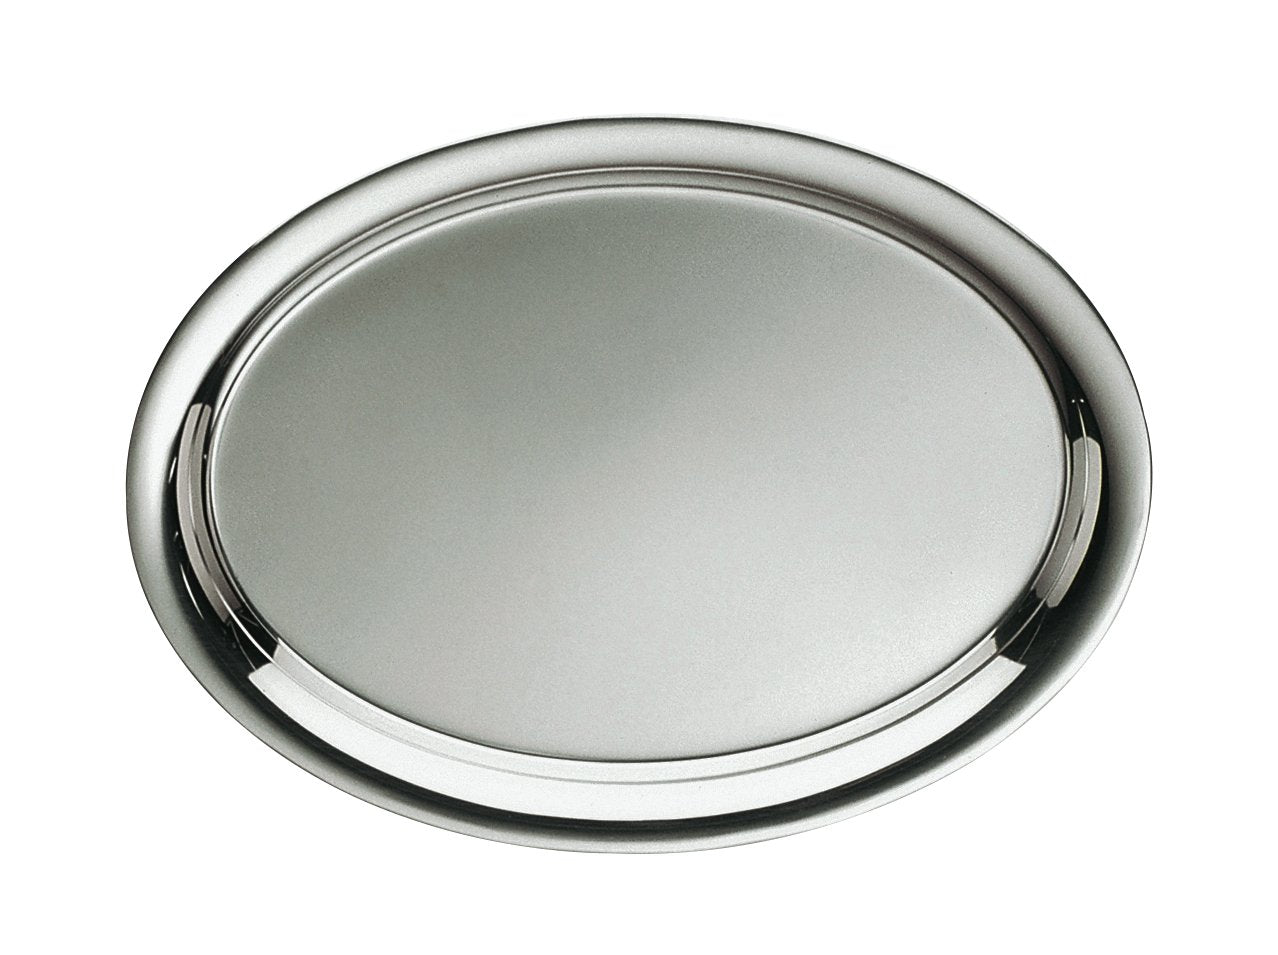 Serving tray, oval, 22.1 x 15.6 cm